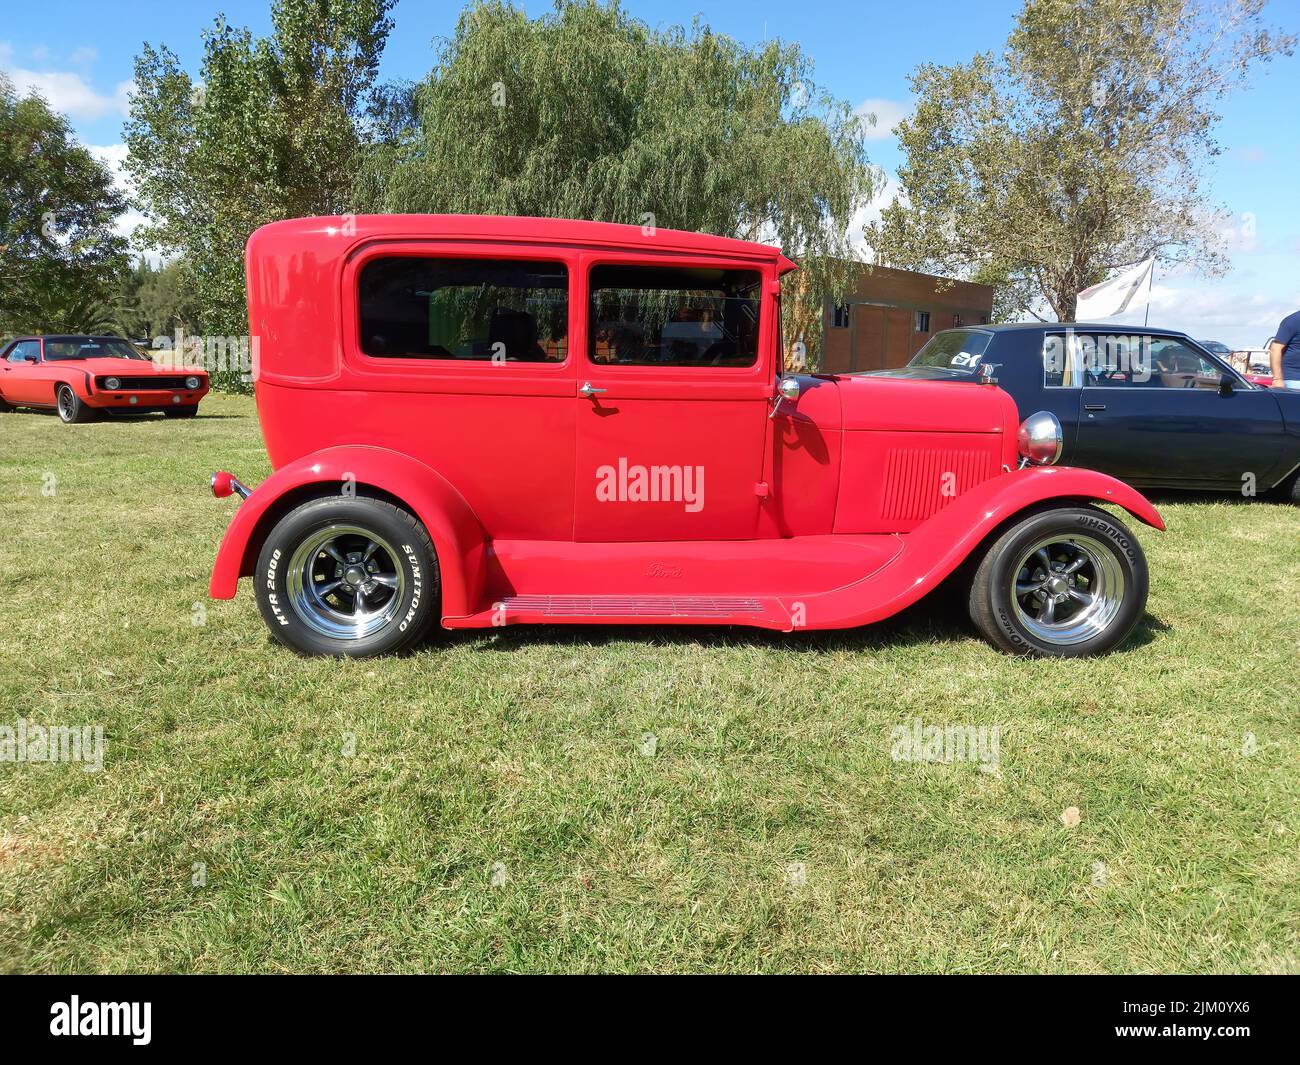 Chascomus, Argentina - Apr 9, 2022: Old red Ford Model A Tudor sedan 1928 - 1931. Hot street rod. Side view. Nature green grass and trees background. Stock Photo